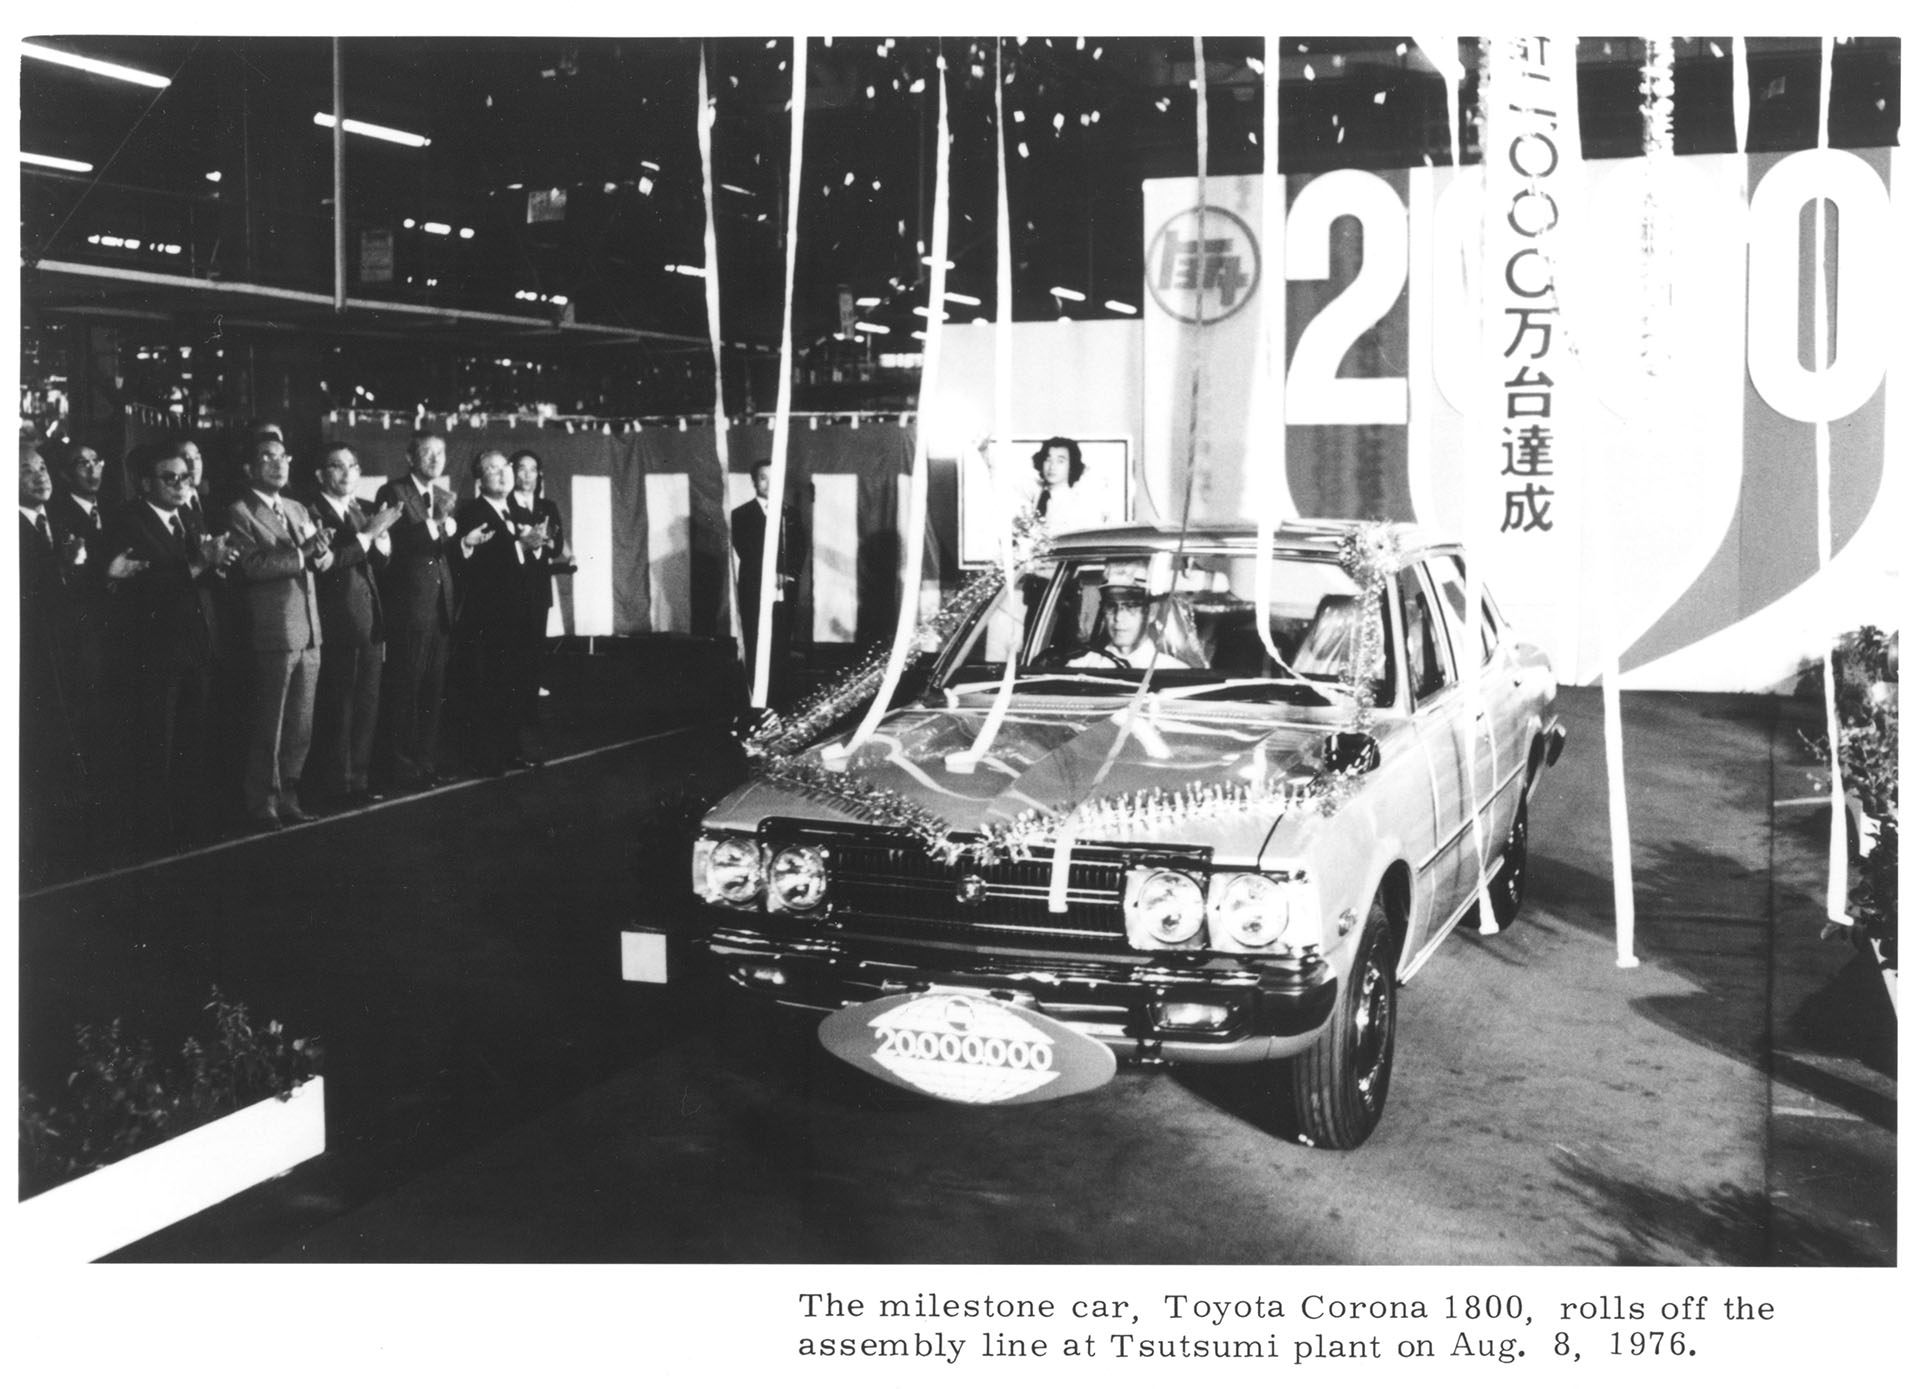 The milestone car, Toyota Corona 1800, rolls off the assembly line at Tsutsumi plant on Aug. 8, 1976.